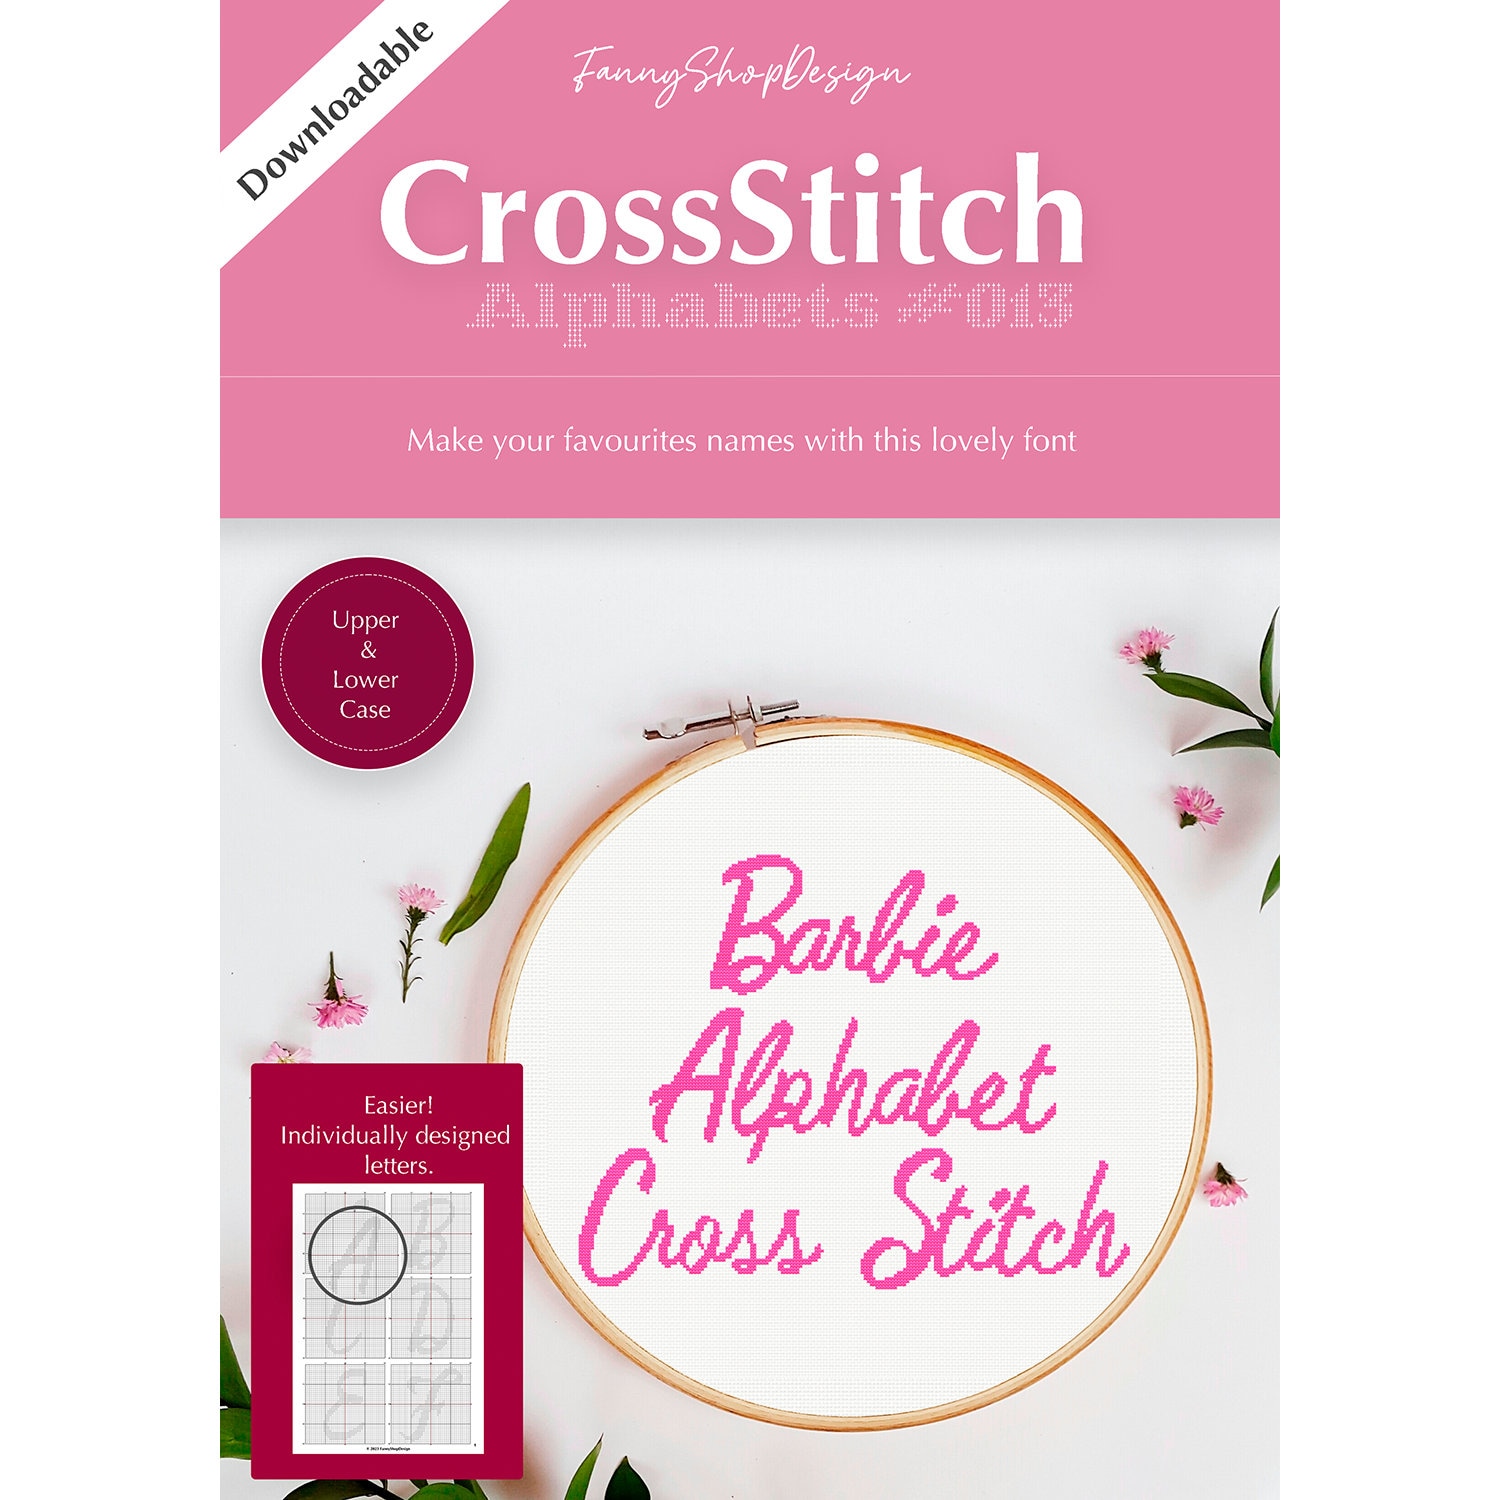 PATTERN Barbie Cross Stitch Chart Instant Download Includes